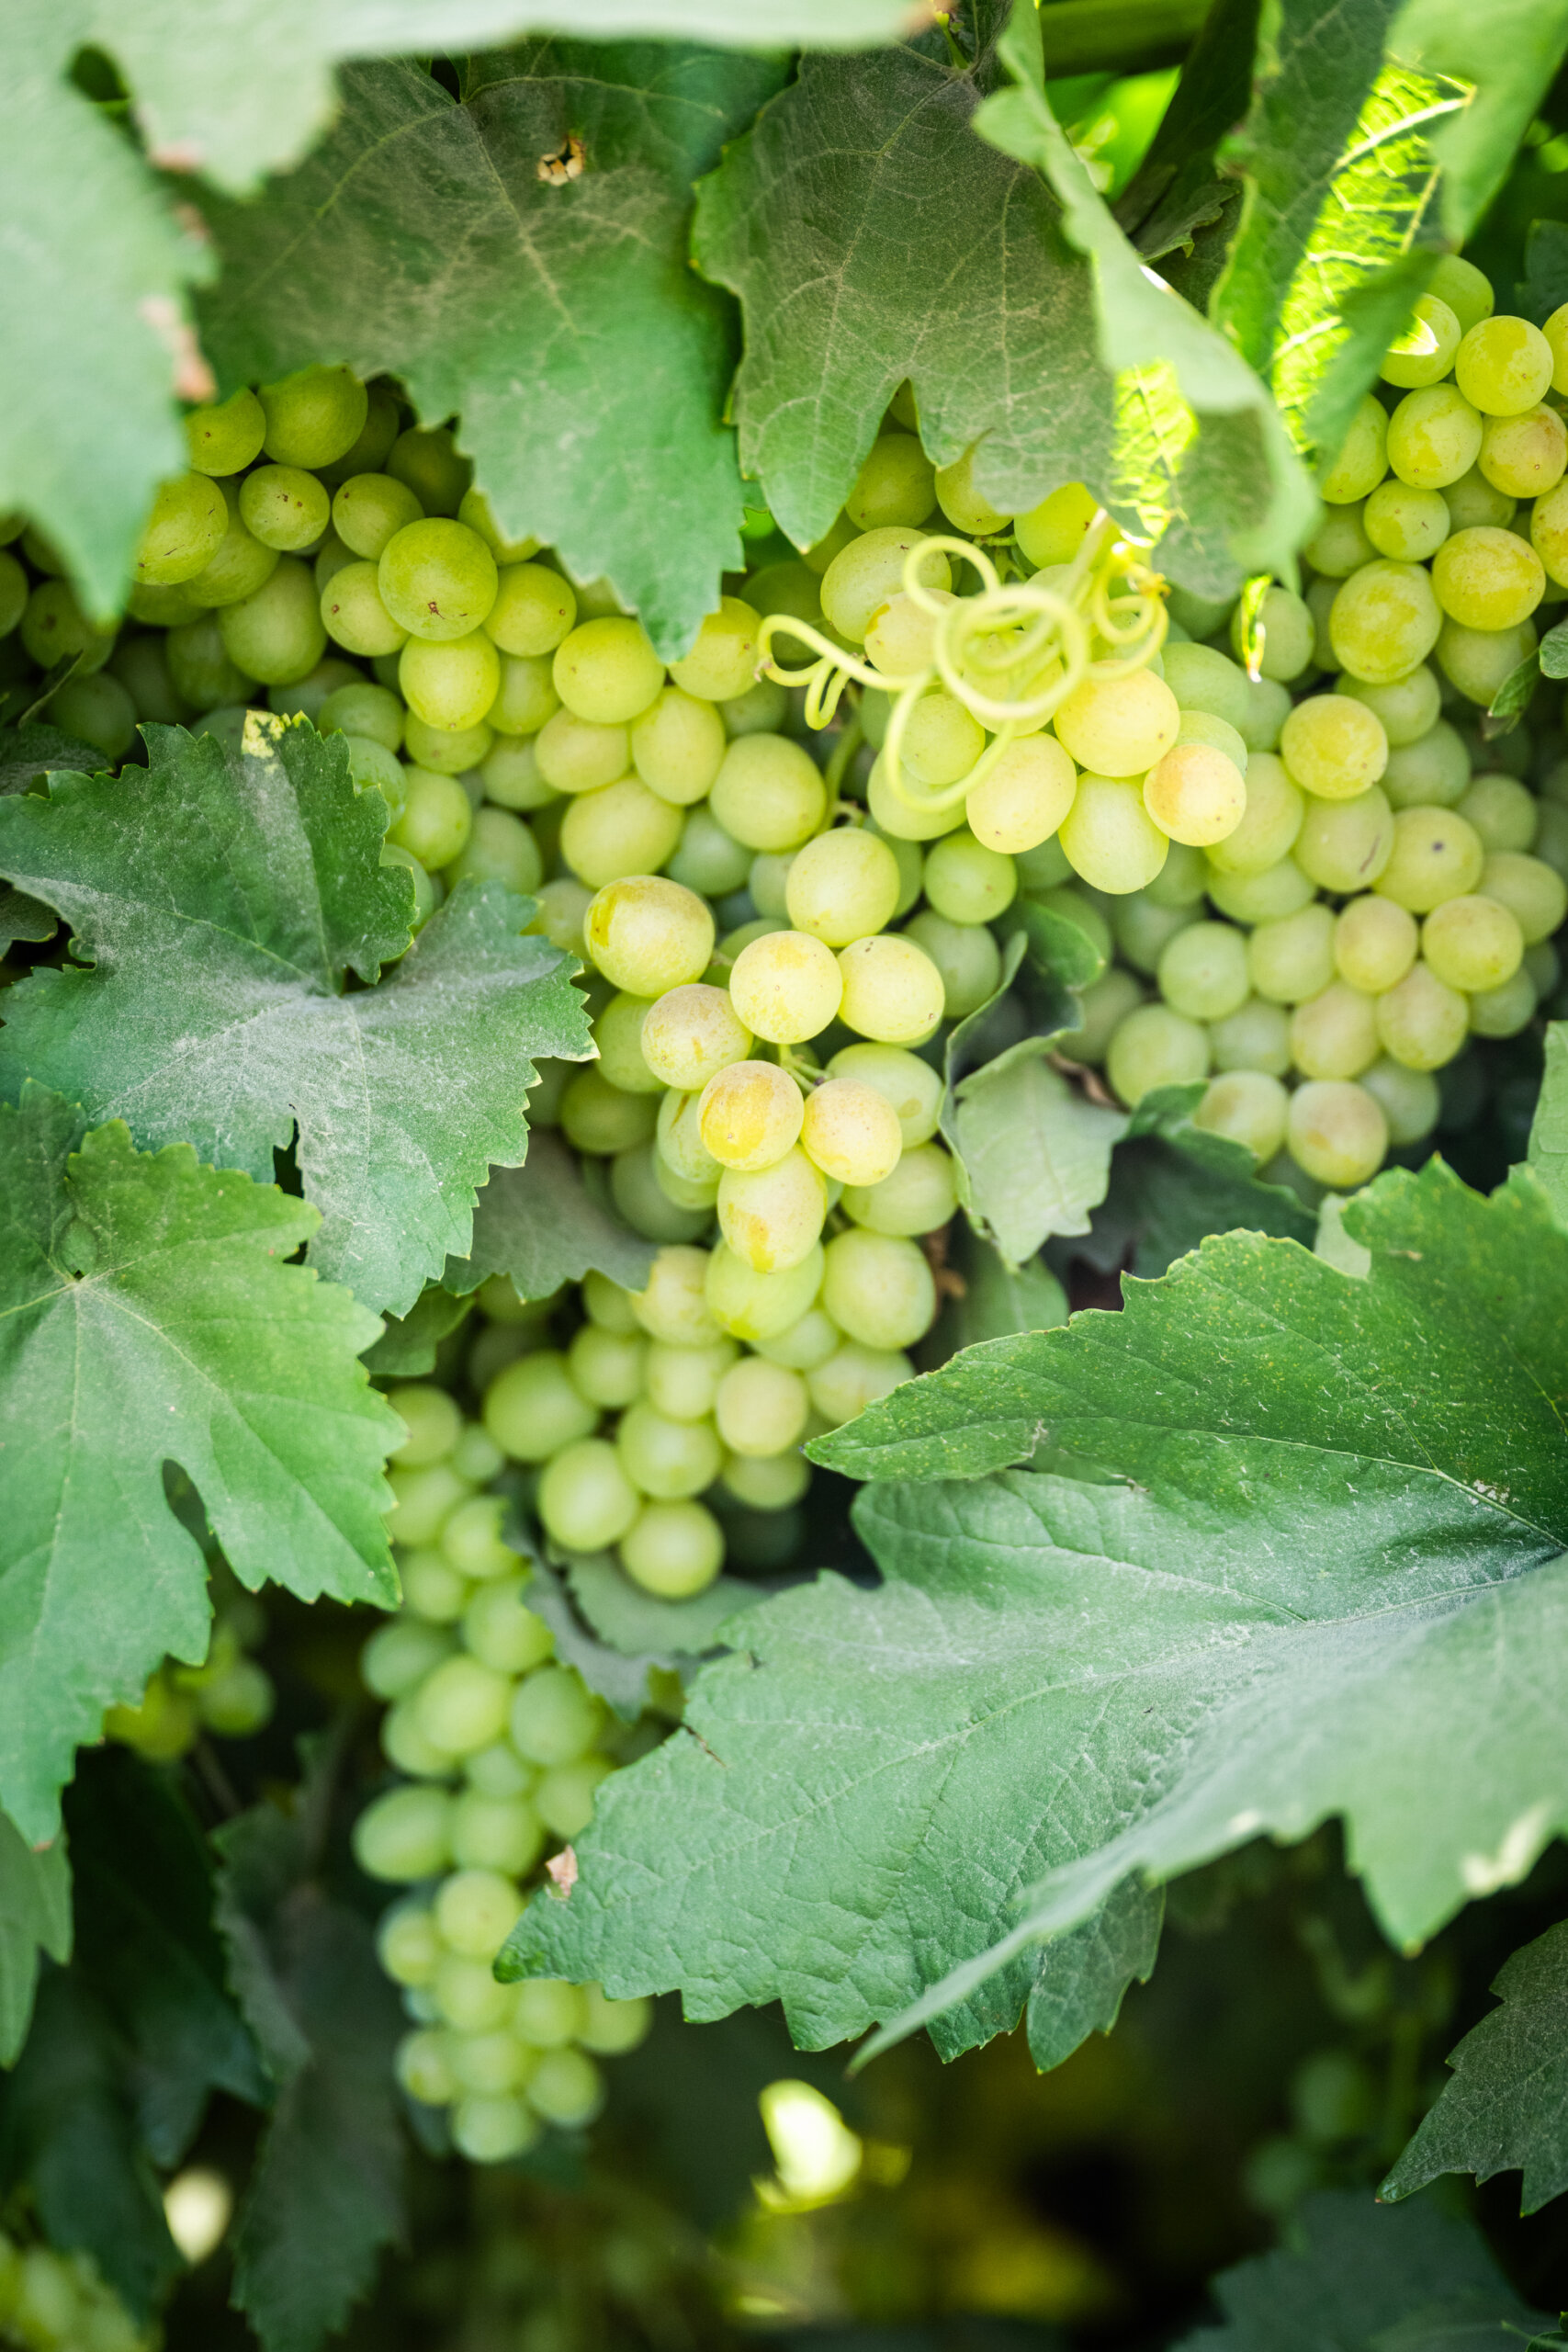 Selma Pete grapes, ripening before being dried on the vine for raisins